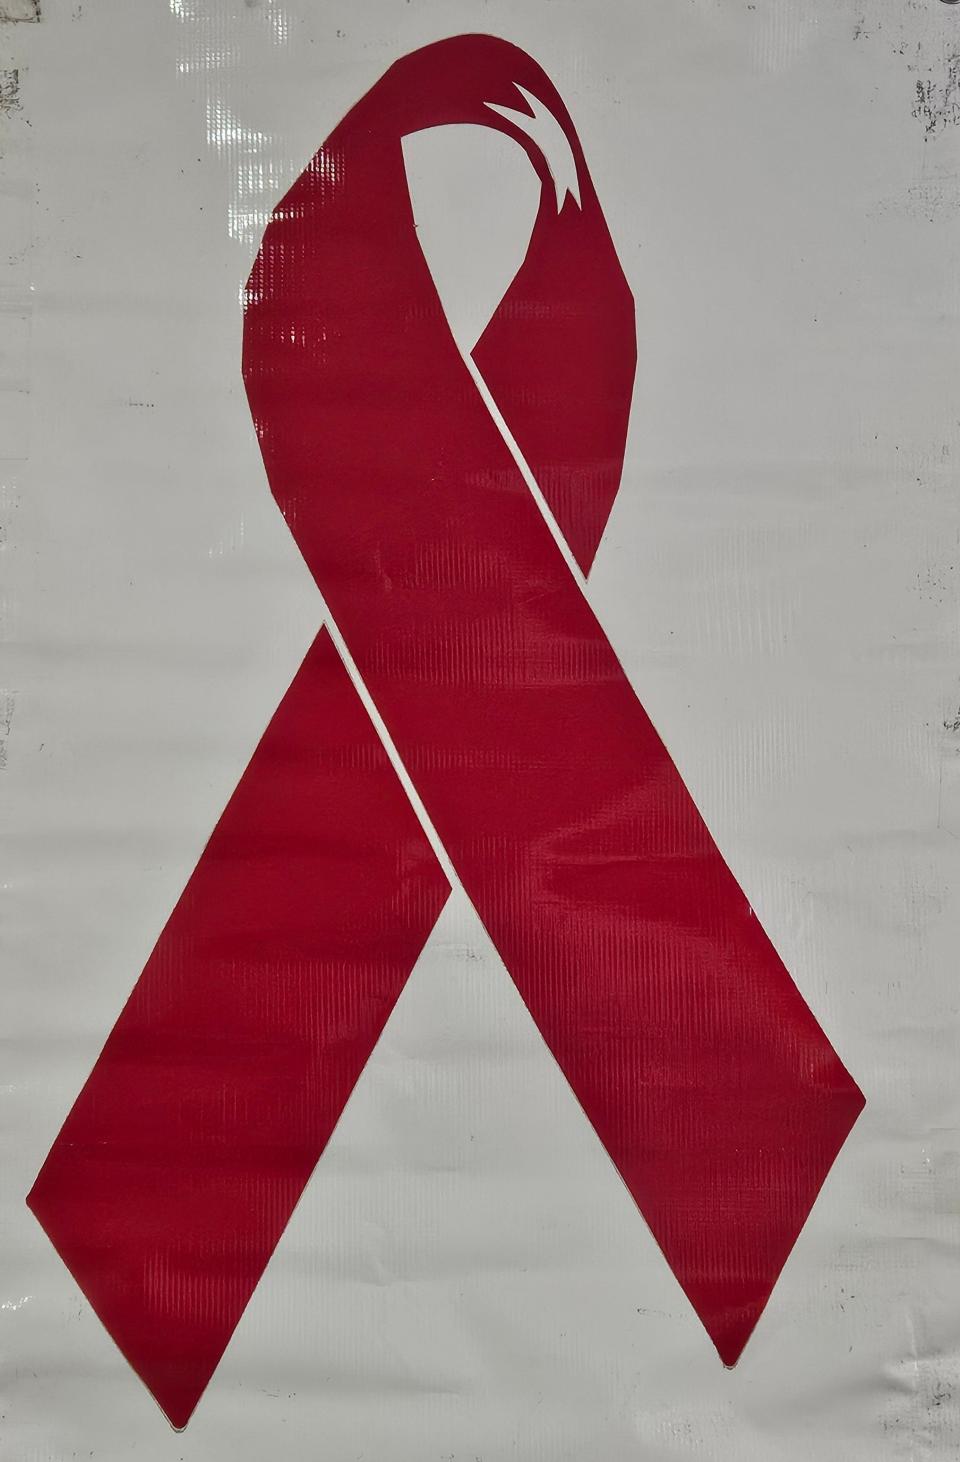 The red ribbon represents raising awareness and supporting those living with HIV.